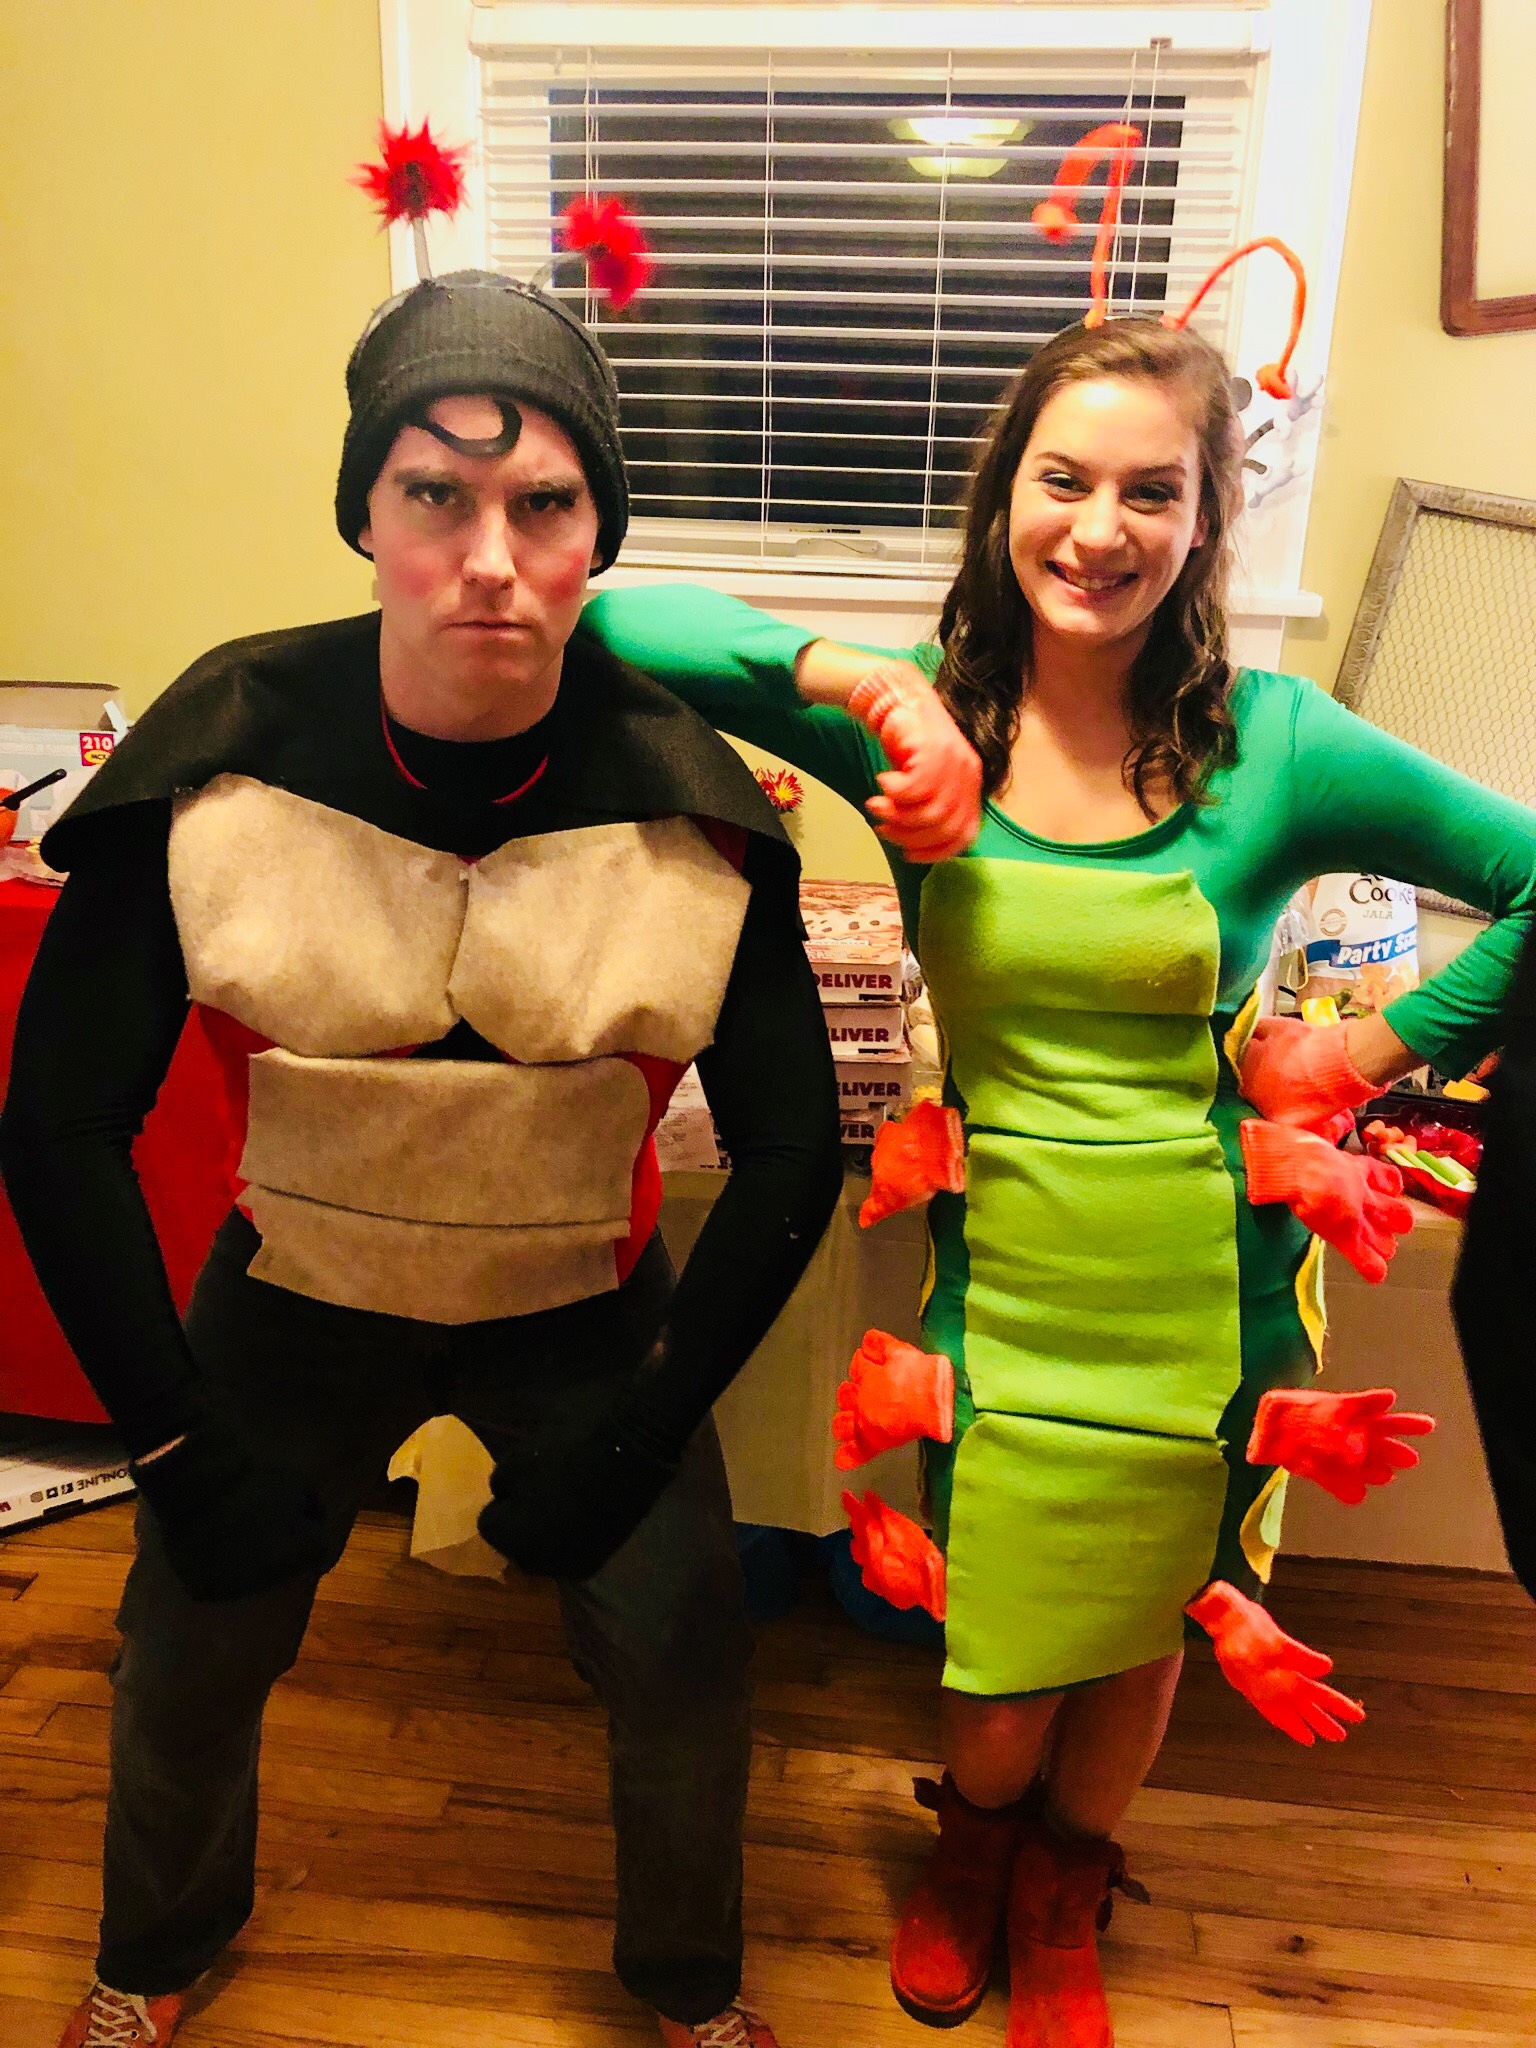 Male and female dressed in homemade bug costumes